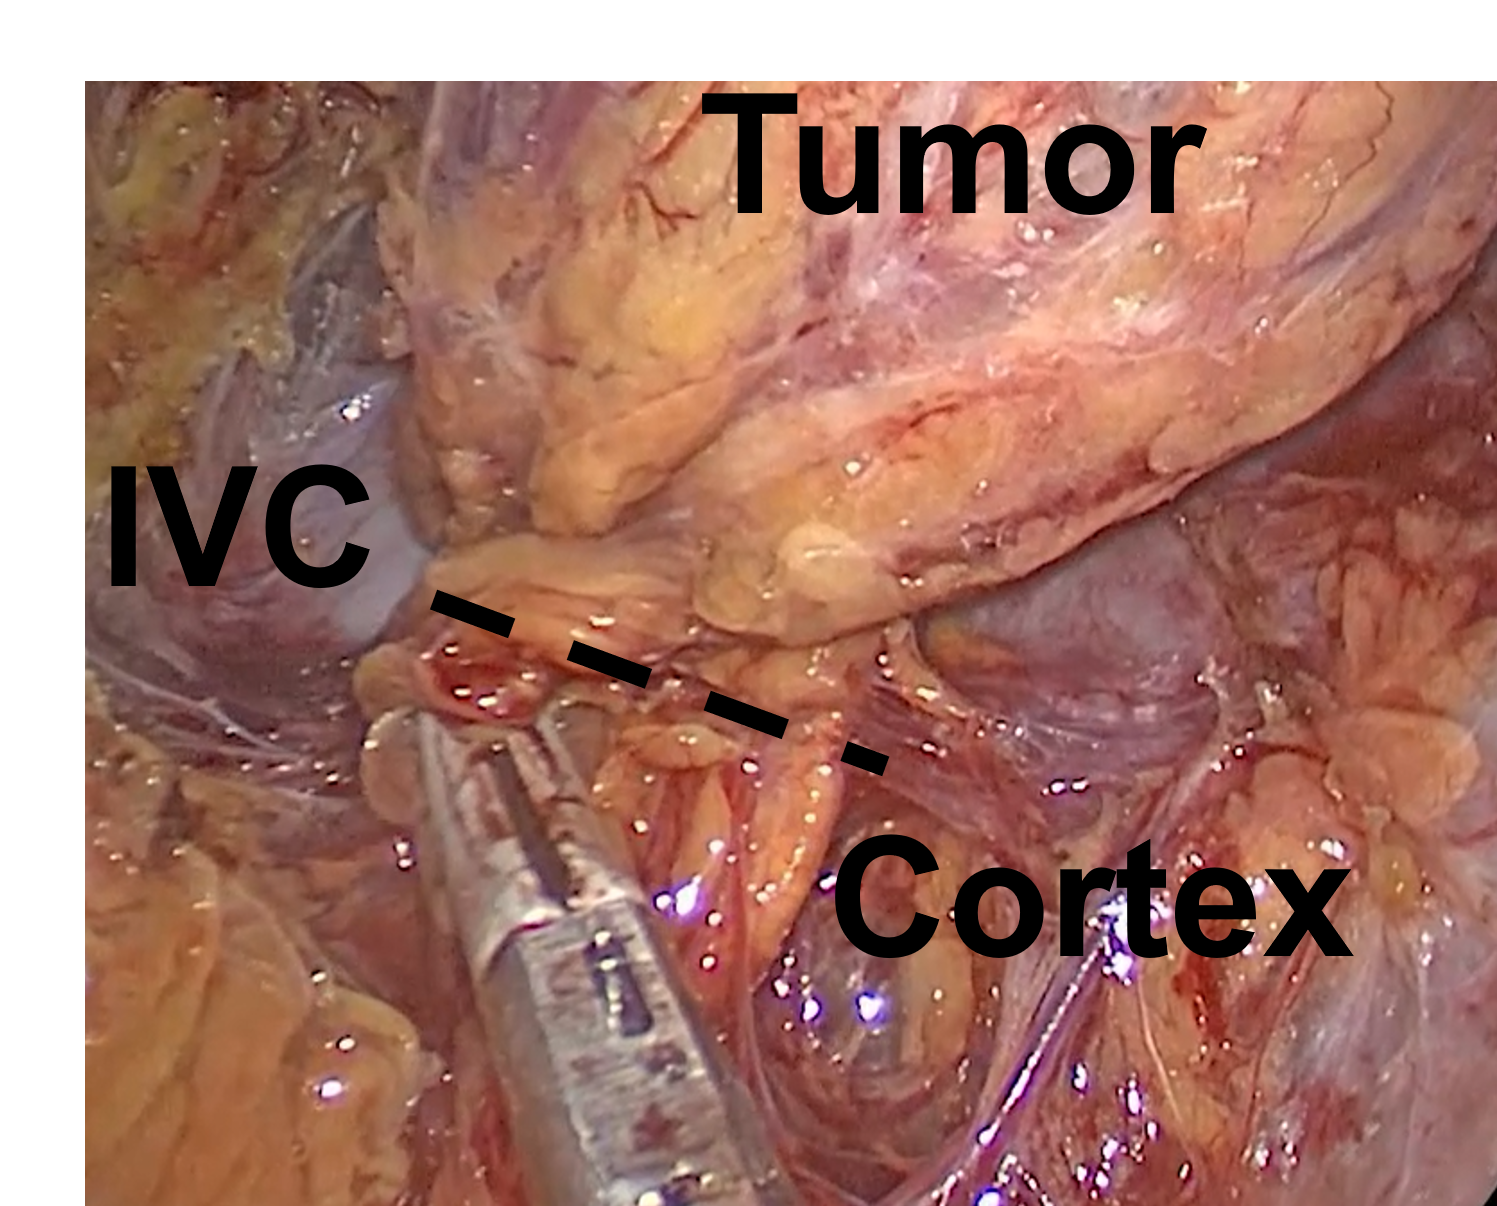 Partial Cortical-Sparing Adrenalectomy Performed via Right Mini Back Scope Adrenalectomy (MBSA). The tumor specimen is divided at the dotted line, removing the tumor, but preserving the normal cortex and the inferior vena cava (IVC).